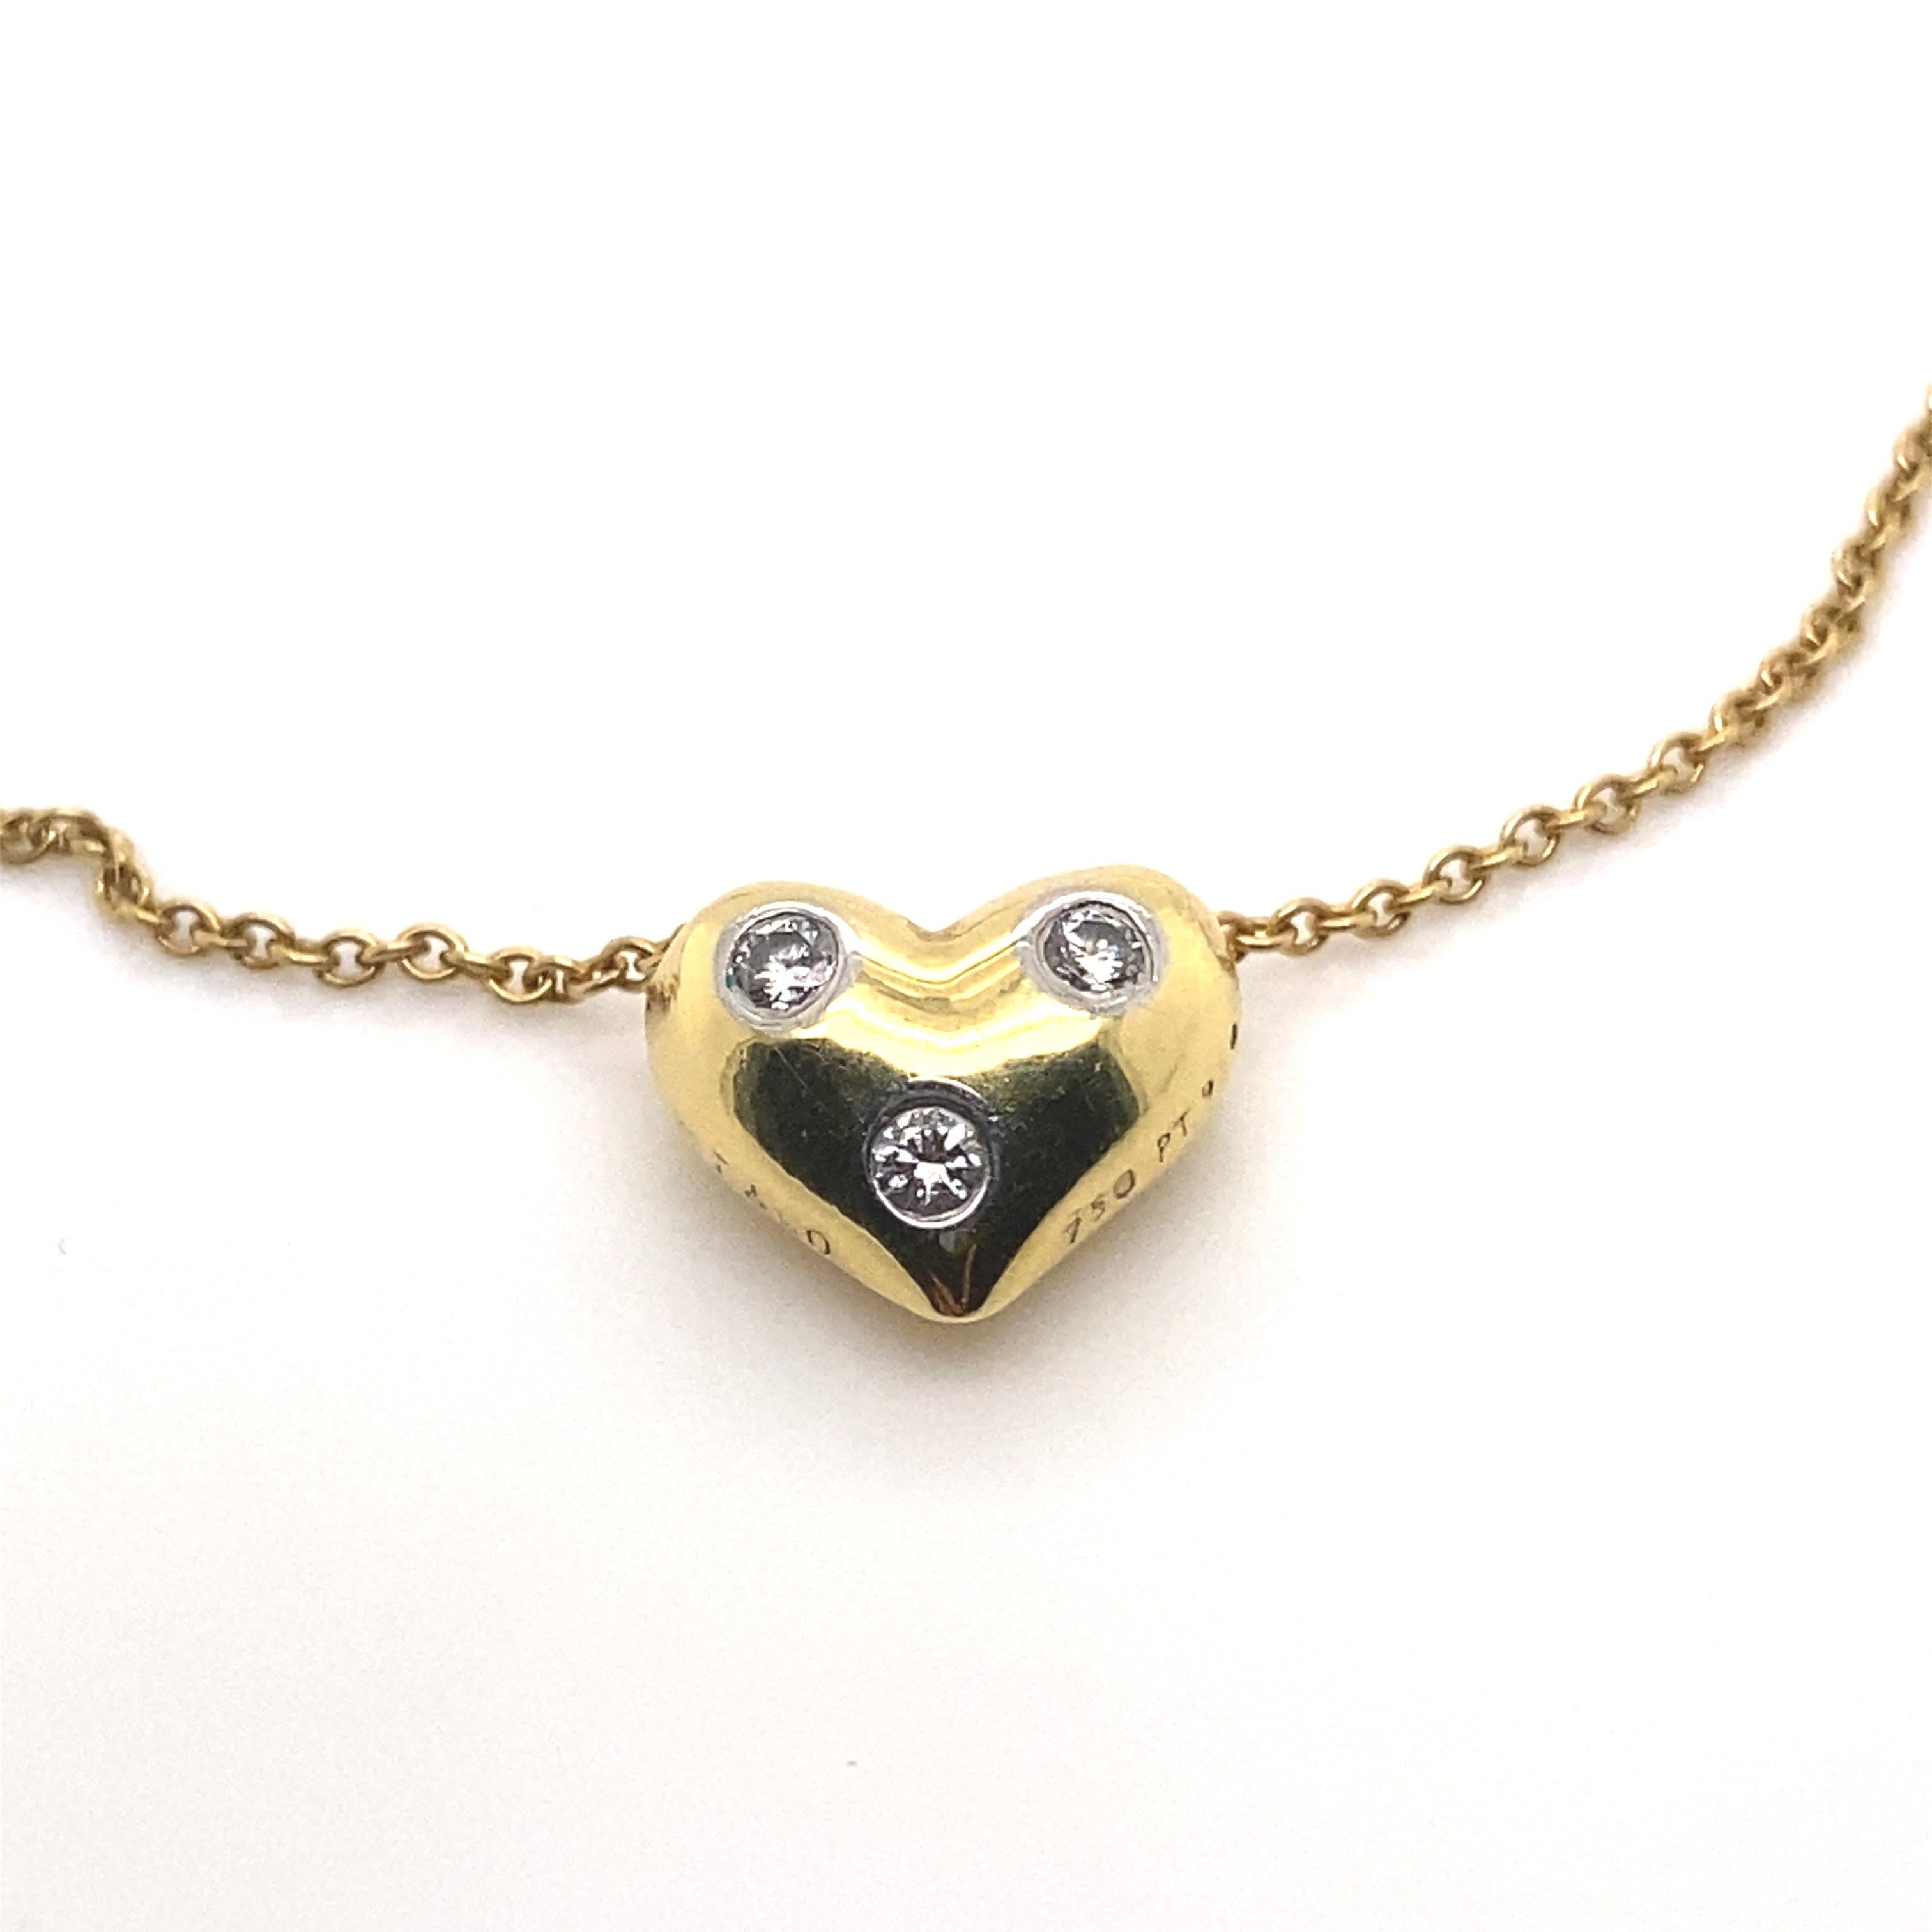 A Tiffany & Co. diamond Etoile heart shaped pendant necklace in 18 karat yellow gold.

This sweet heart shaped pendant features three diamonds scattered throughout the solid gold heart, each set within a fine circular platinum bezel - to enhance the